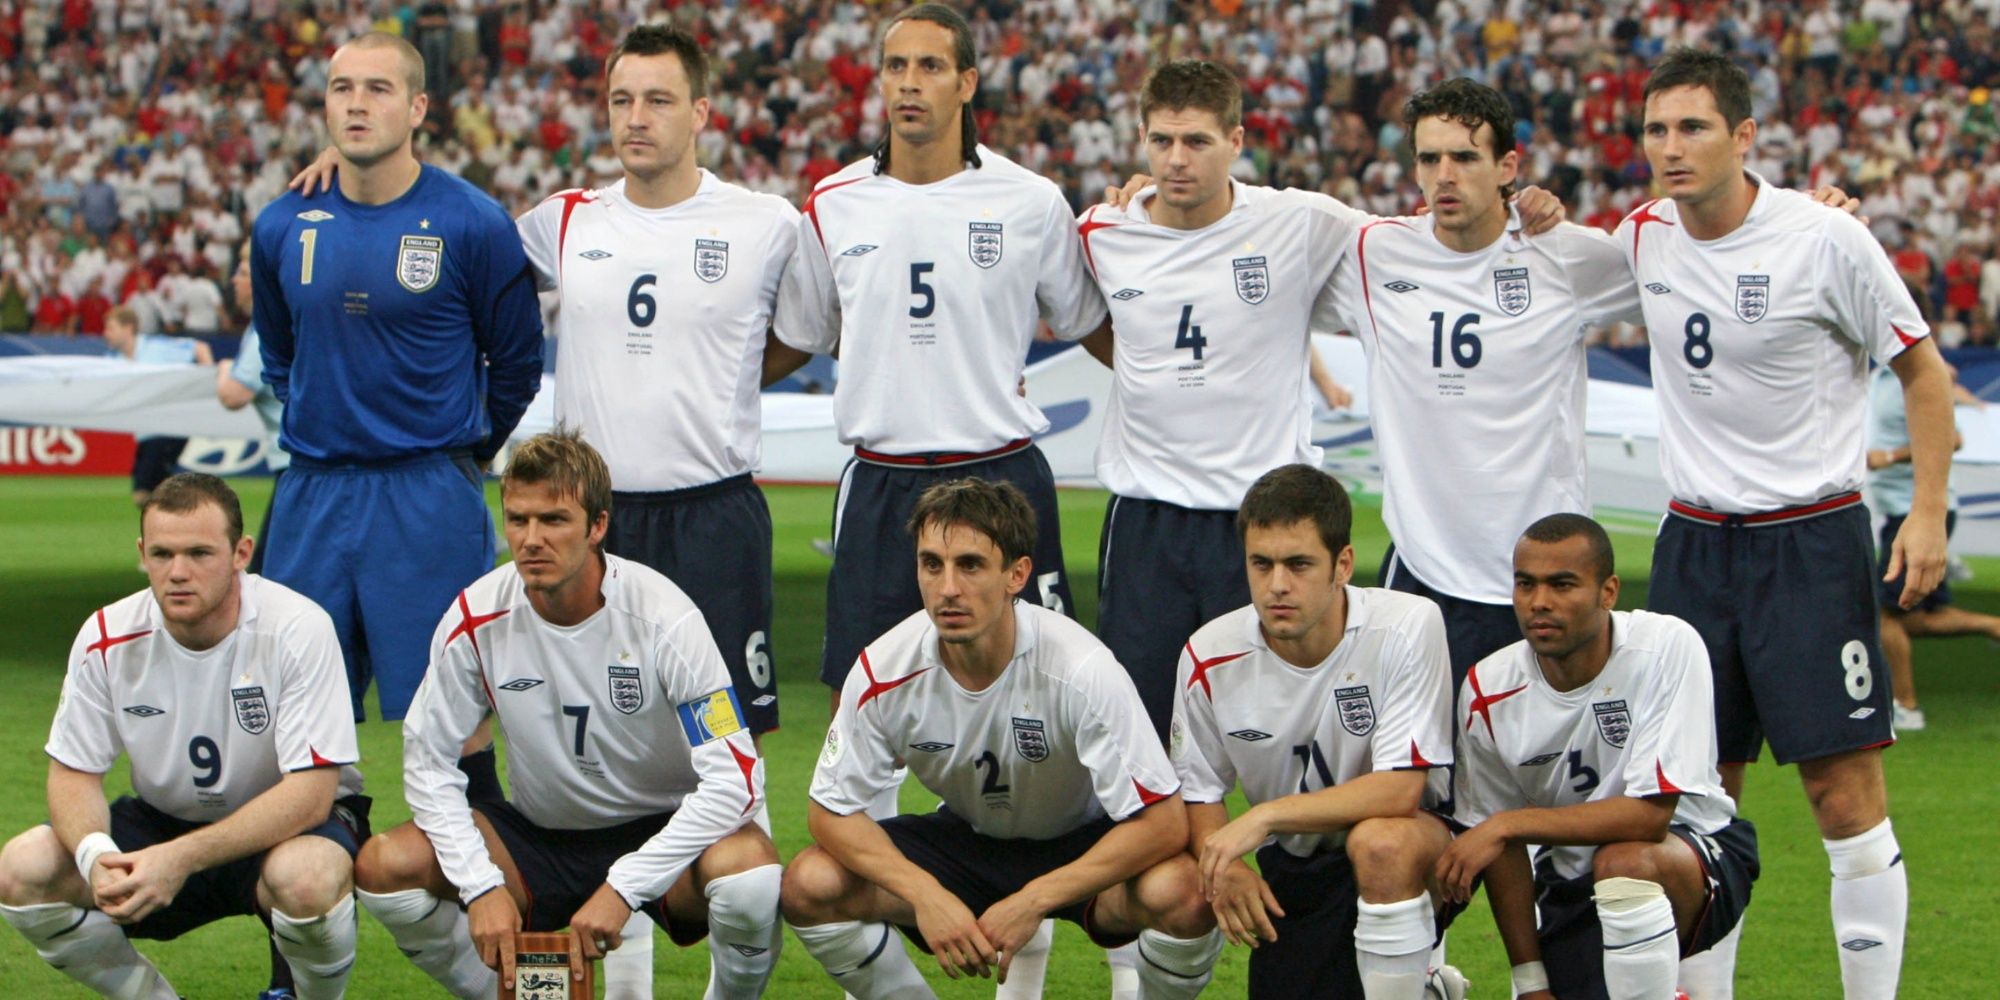 England national soccer team players pose for a team photo before their World Cup 2006 quarter-final soccer match against Portugal